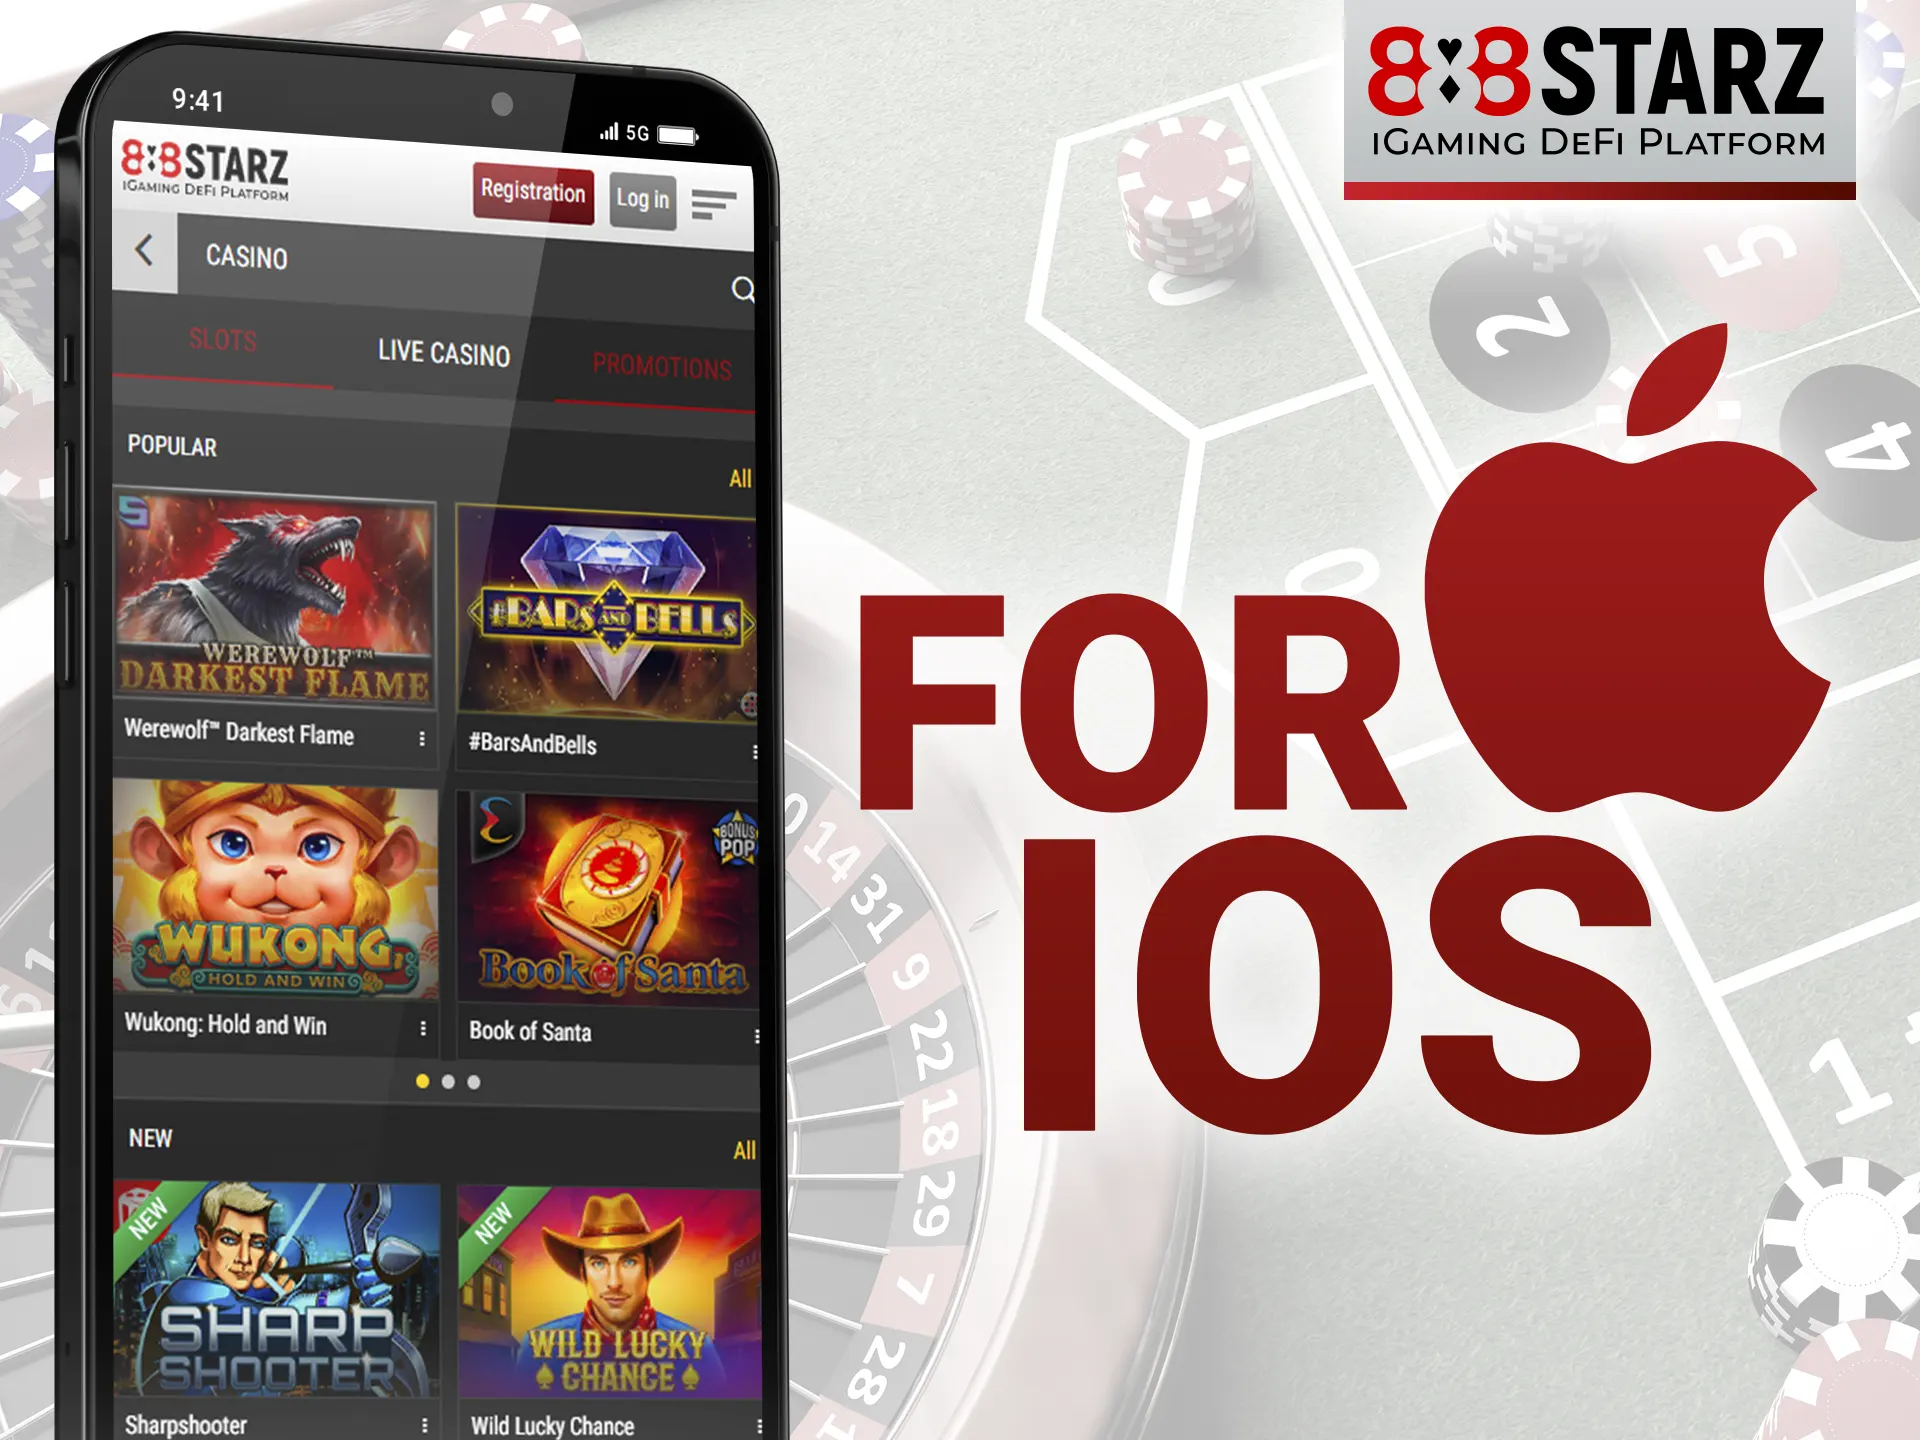 The 888starz mobile app is compatible with iOS devices, and users can download the software from the 888starz website for free.